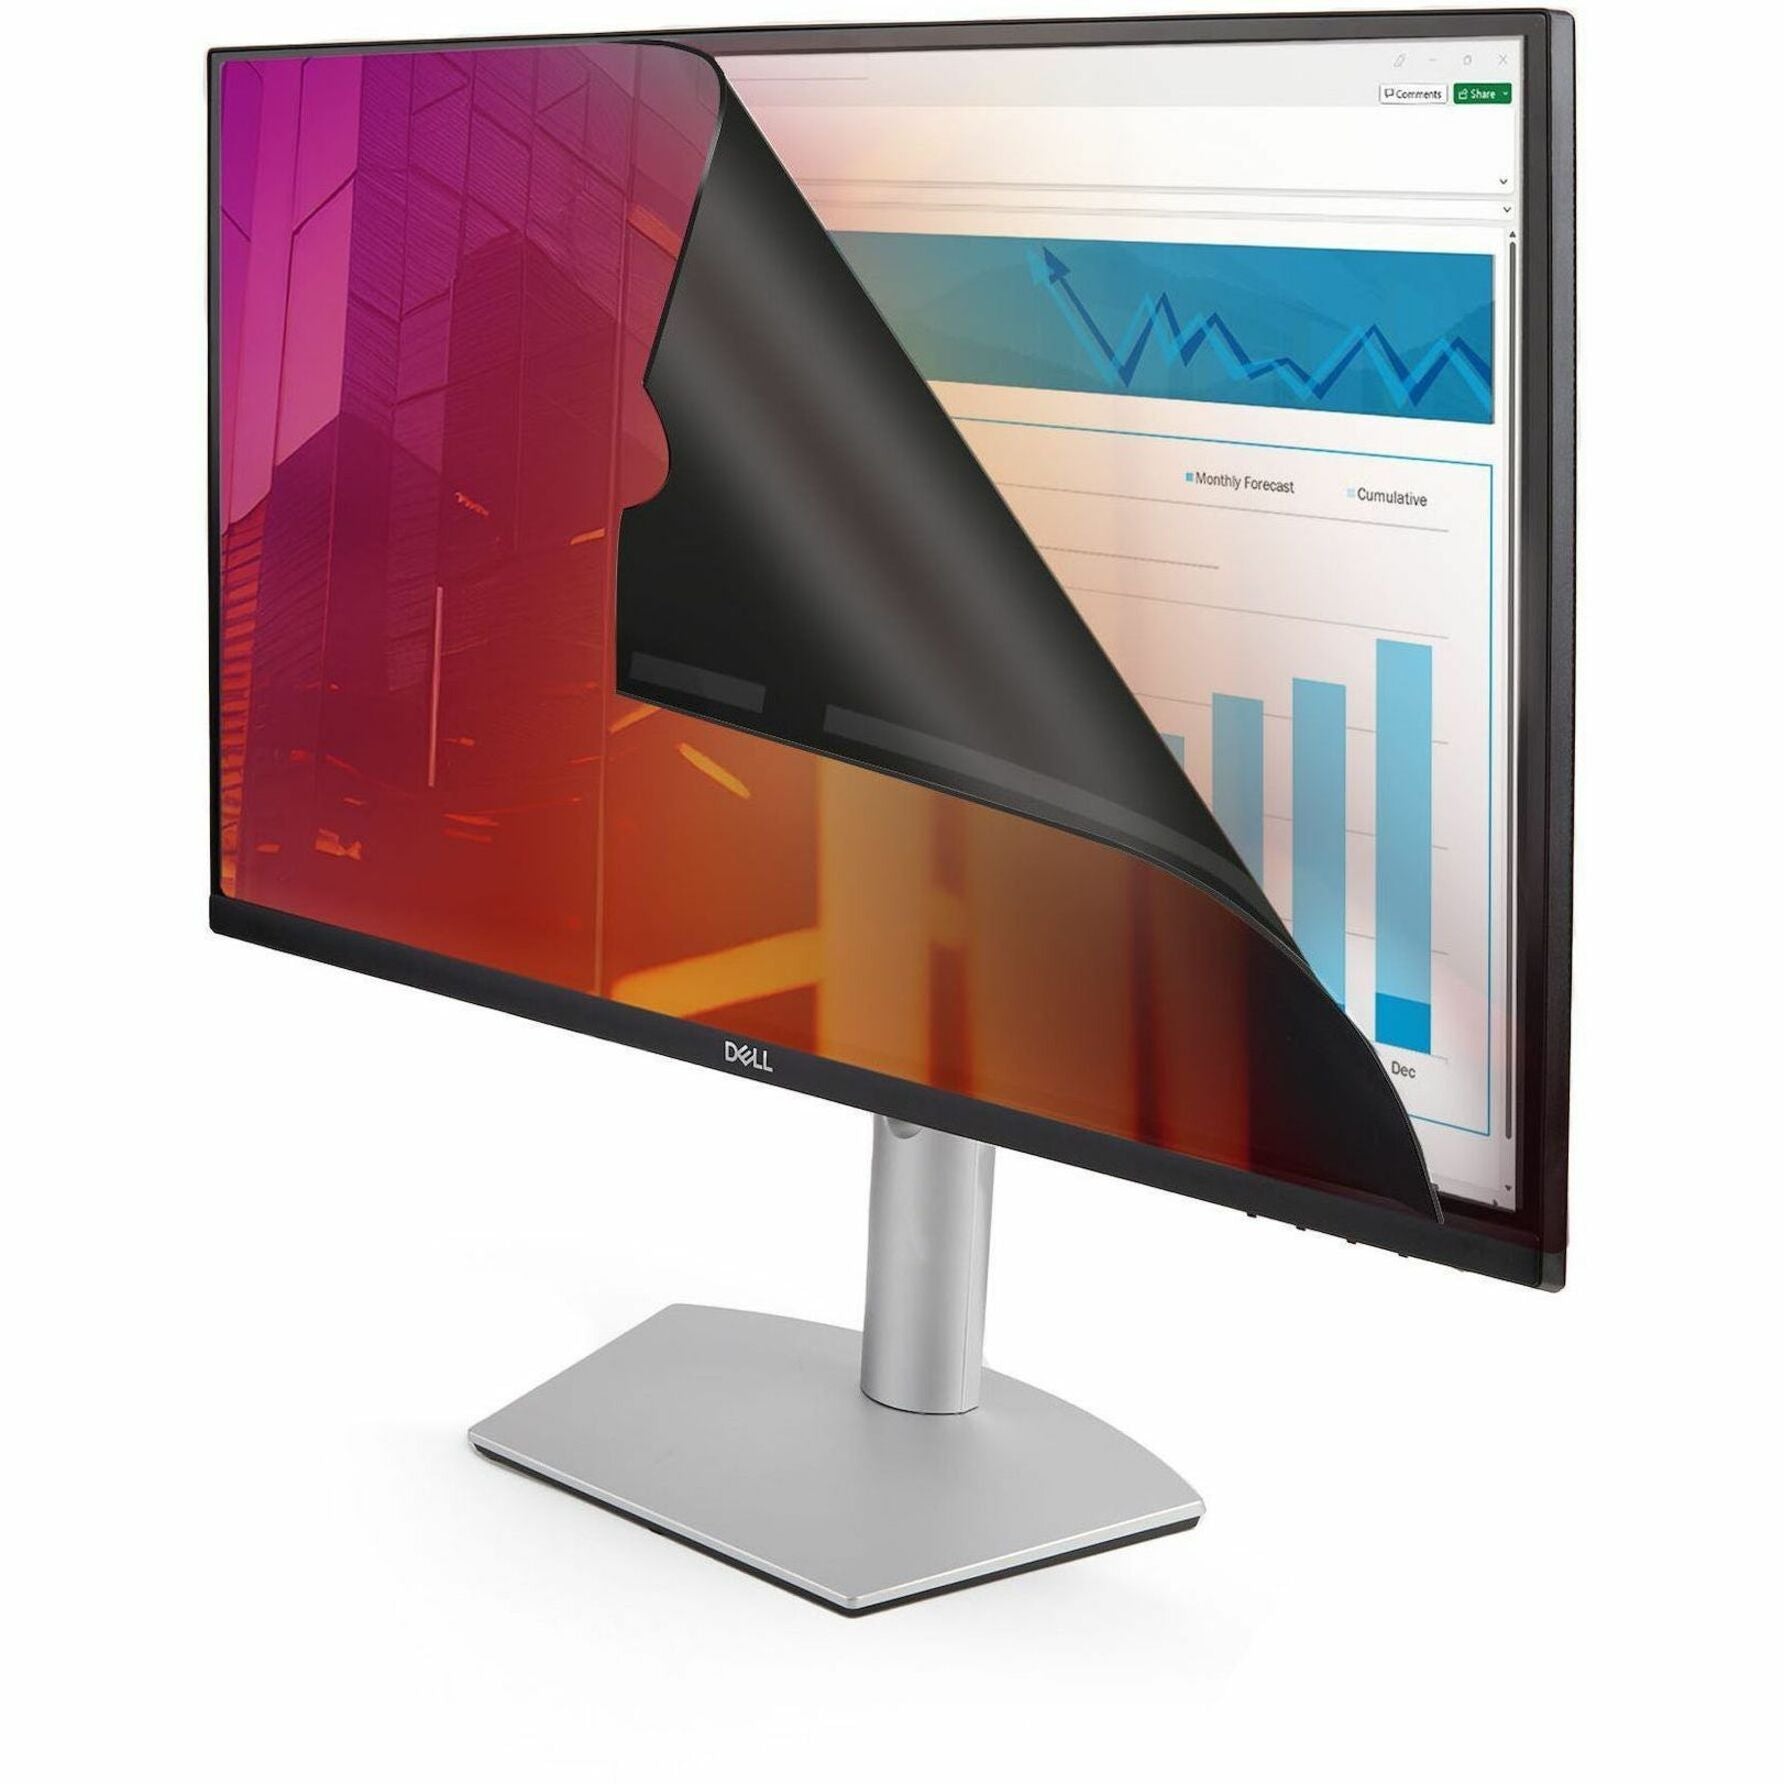 StarTech.com 2769G-PRIVACY-SCREEN Privacy Screen Filter, Limited Viewing Angle, Eyesight Protection, Removable, Residue-free, 27" Display Size Supported